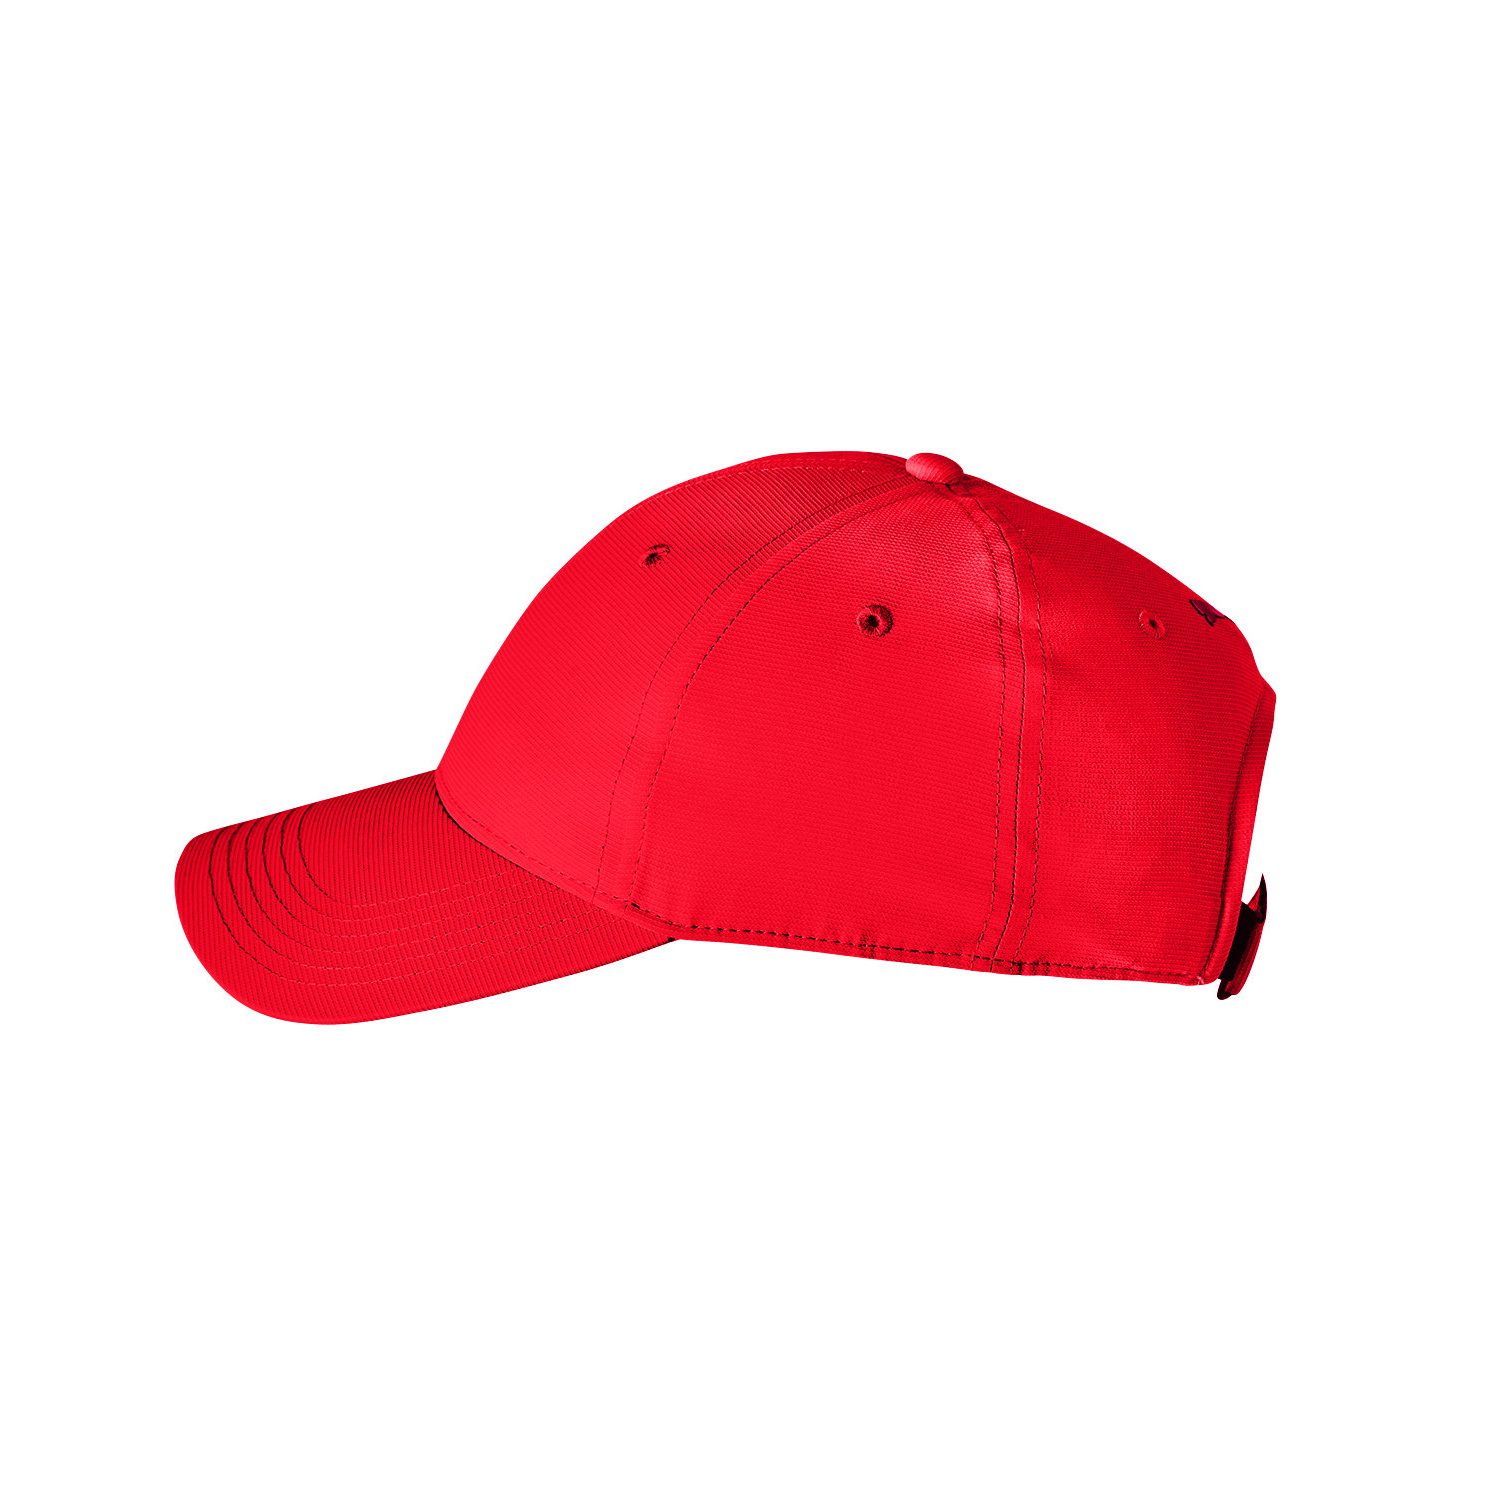 Puma Golf Adult Pounce Adjustable Cap #22673 Red Side